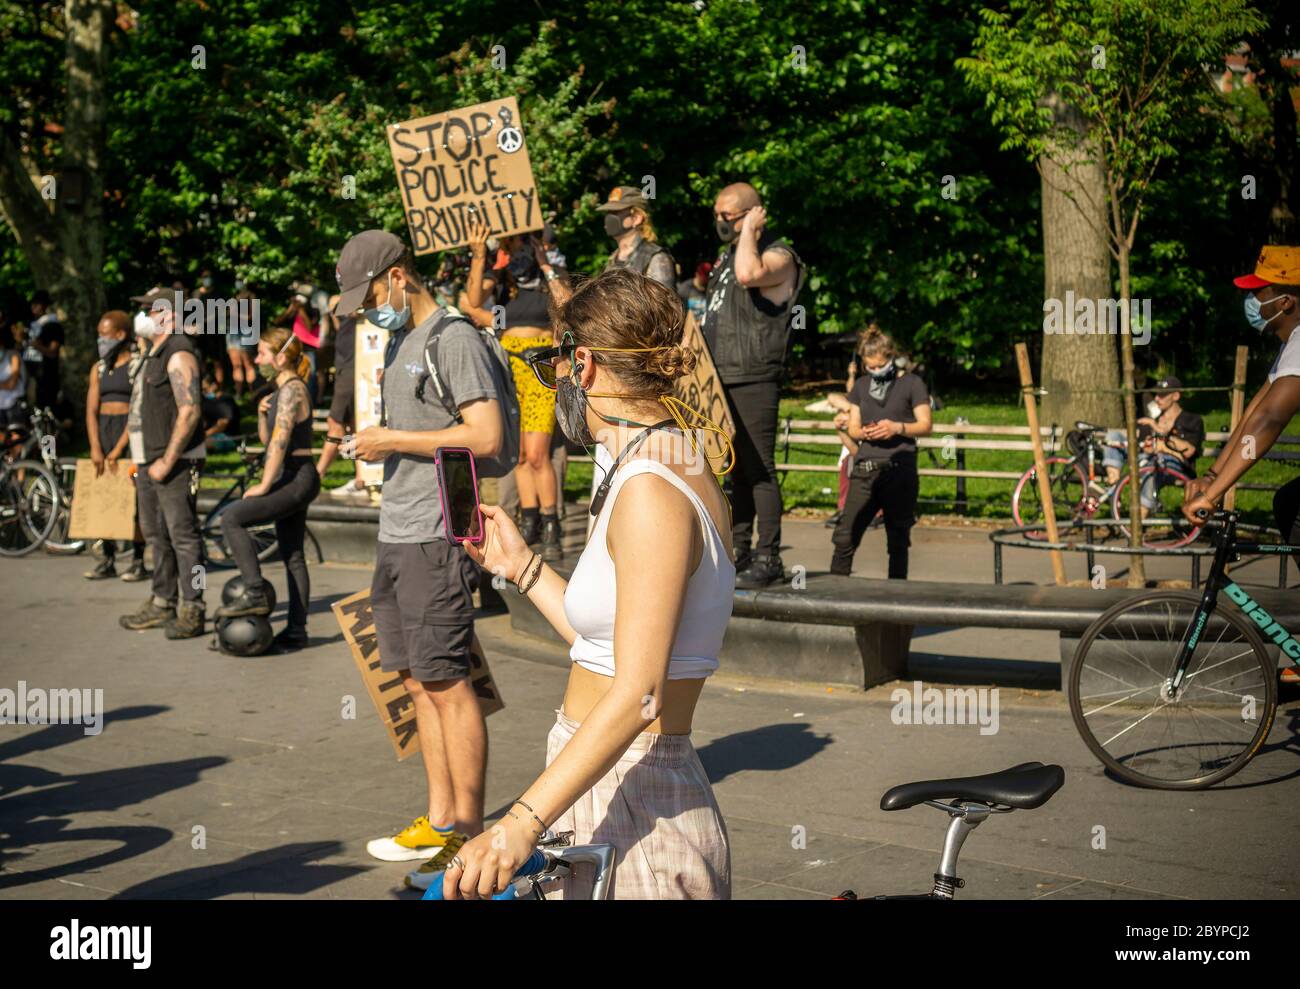 Black Lives Matter demonstrators rally, prior to marching, in Washington Square Park in New York protesting the death of George Floyd, seen on Tuesday, June 9, 2020. (© Richard B. Levine) Stock Photo